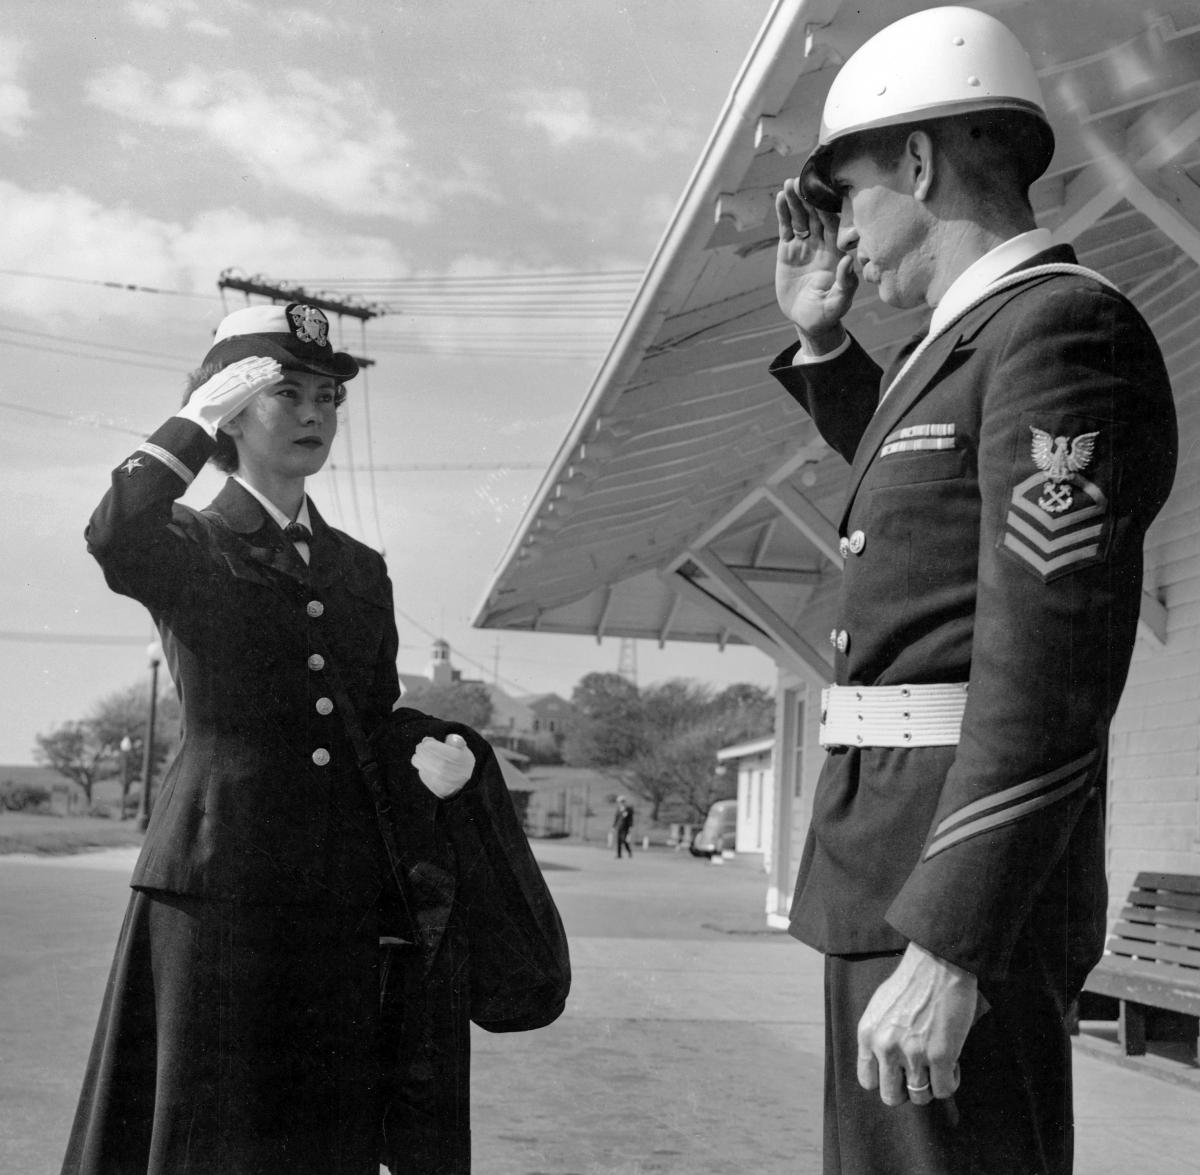 A newly minted ensign exchanges farewell salutes with a chief at OCS in Newport, Rhode Island